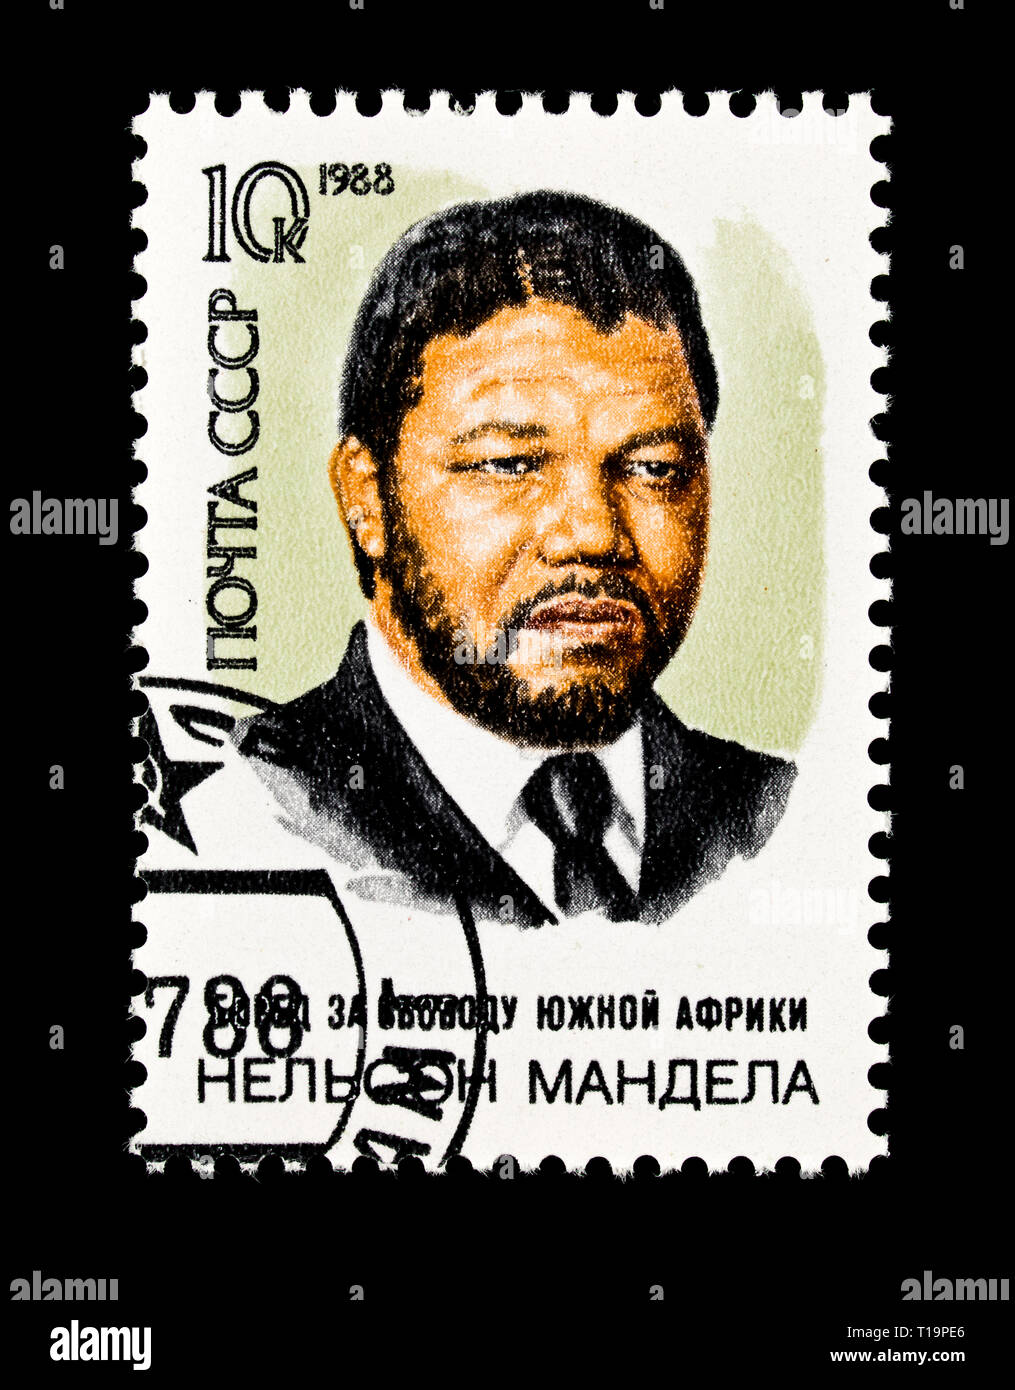 Postage stamp from the Soviet Union depicting Nelson Mandela, south African anti-apartheid leader. Stock Photo